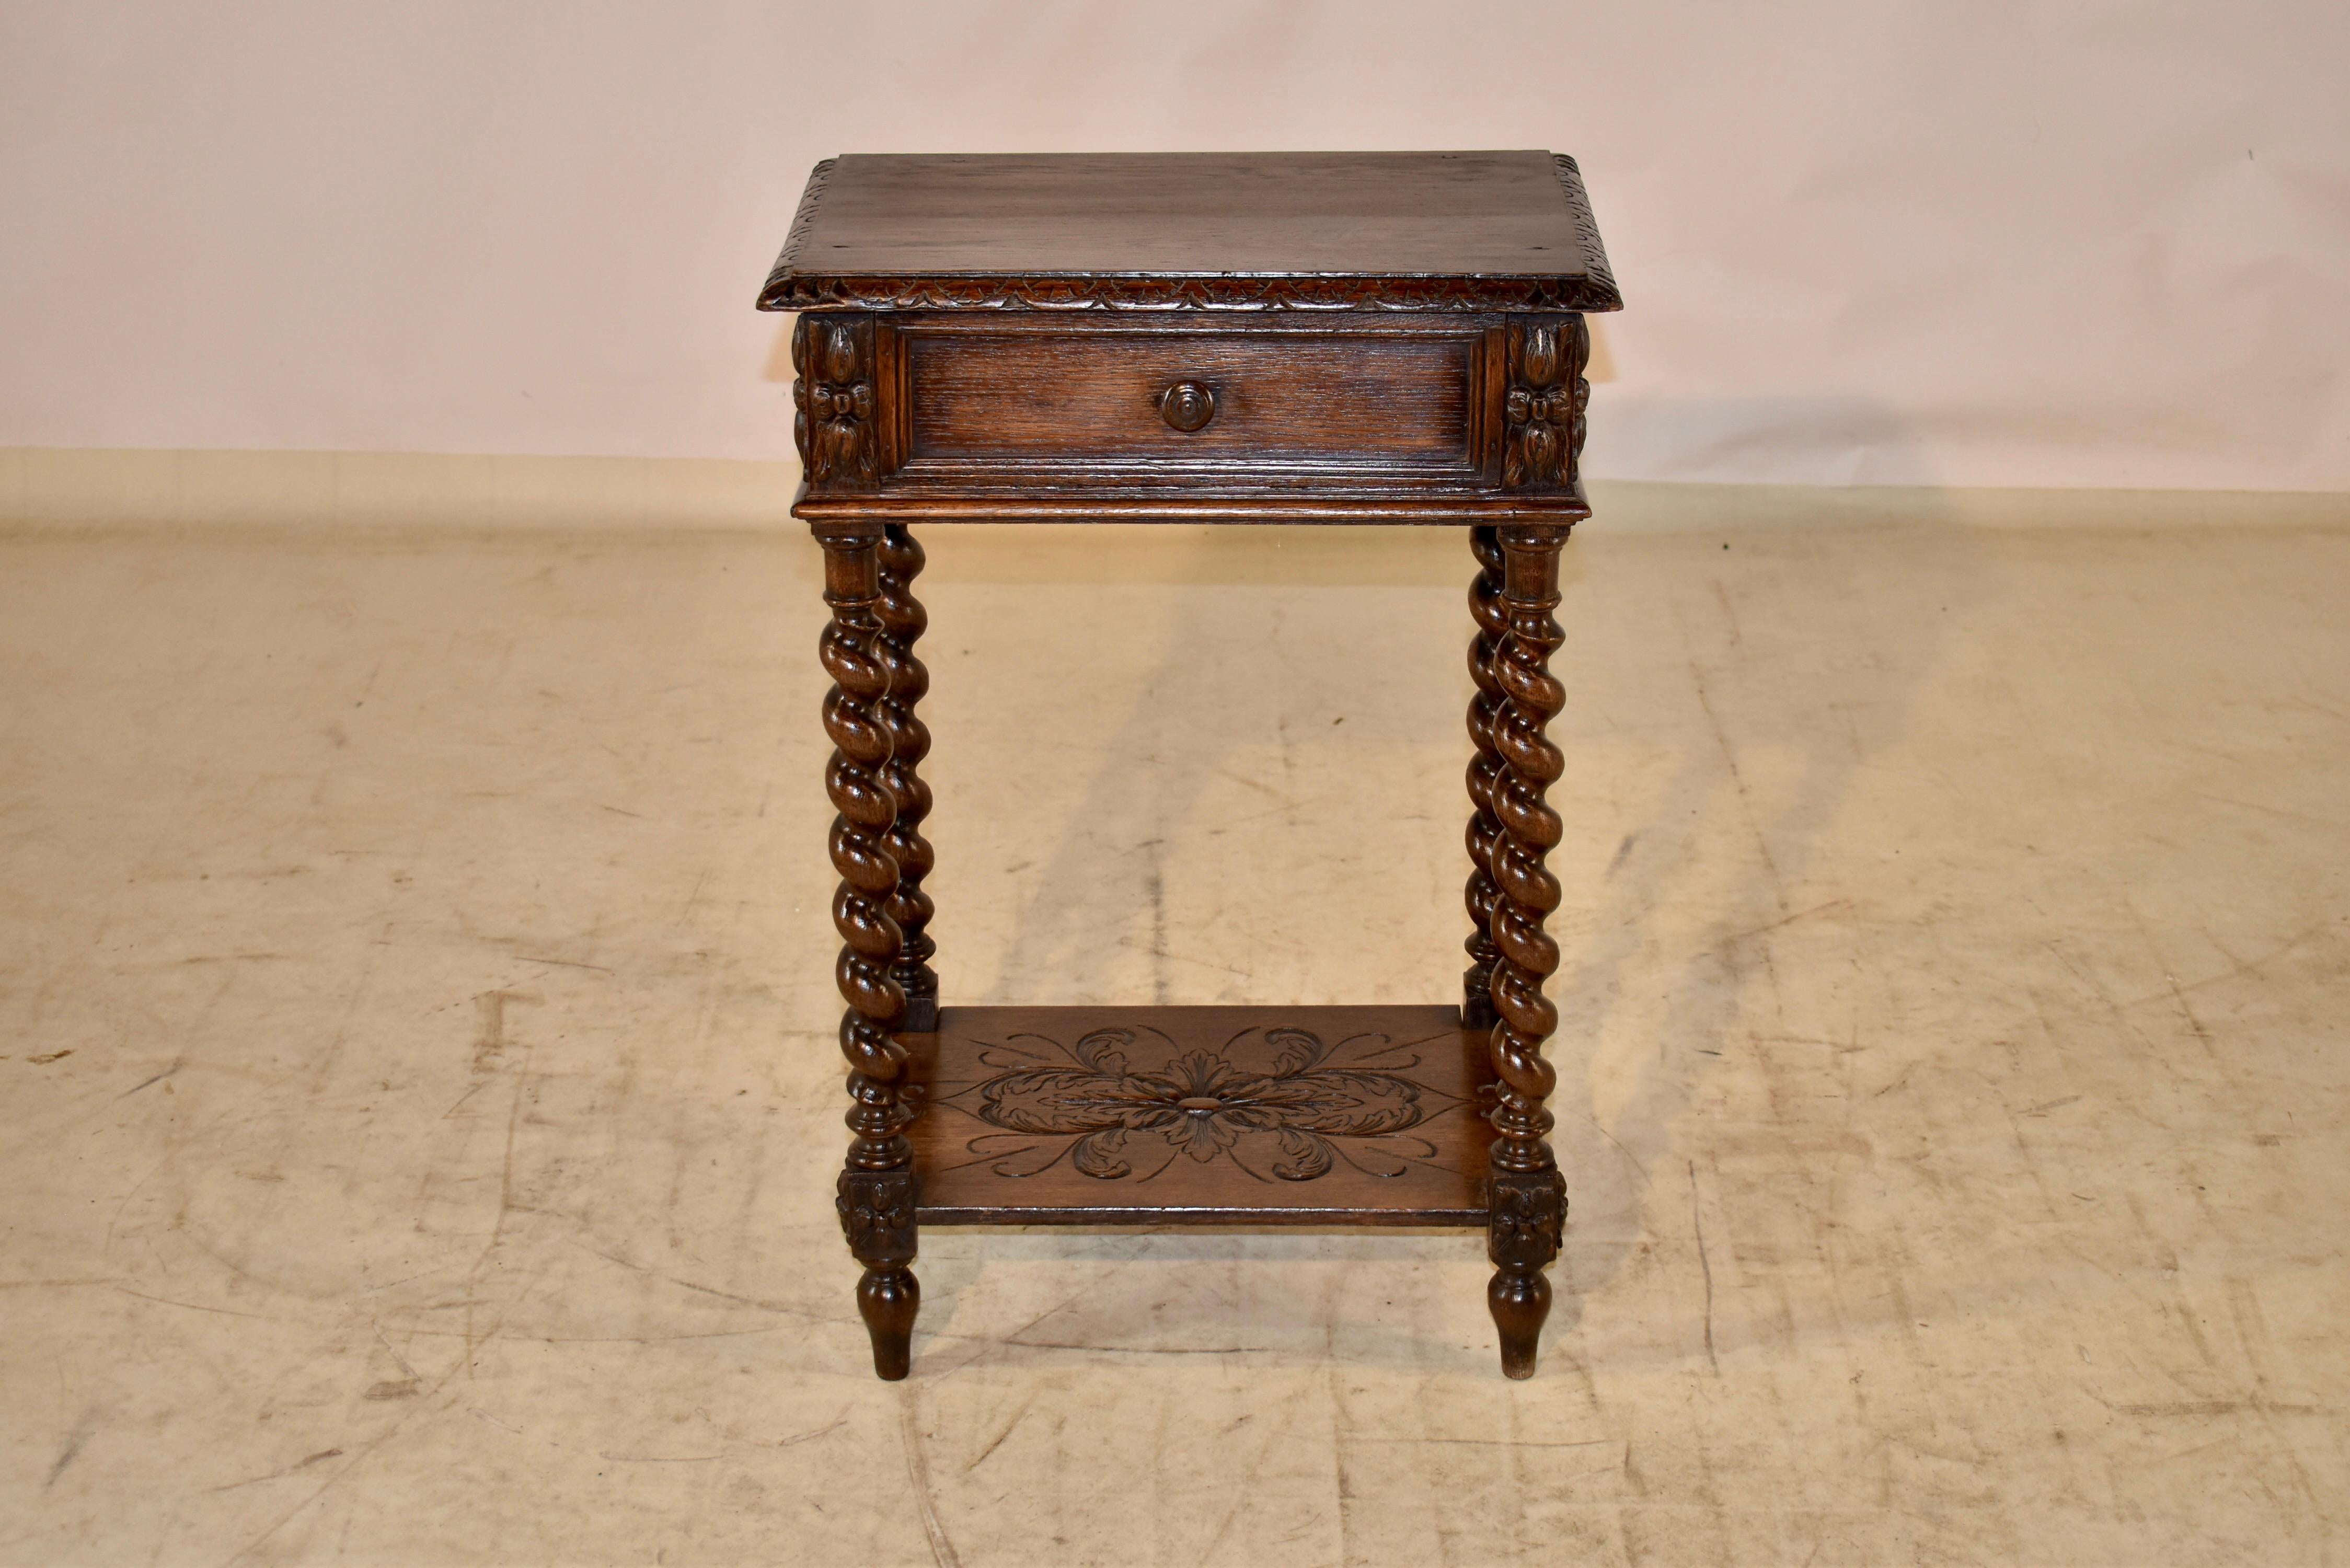 19th century oak side table from France with a wonderfully grained top which has a beveled and carved edge, following down to paneled sides, the panels flanked by applied hand carved details. There is a single paneled drawer in the front and the